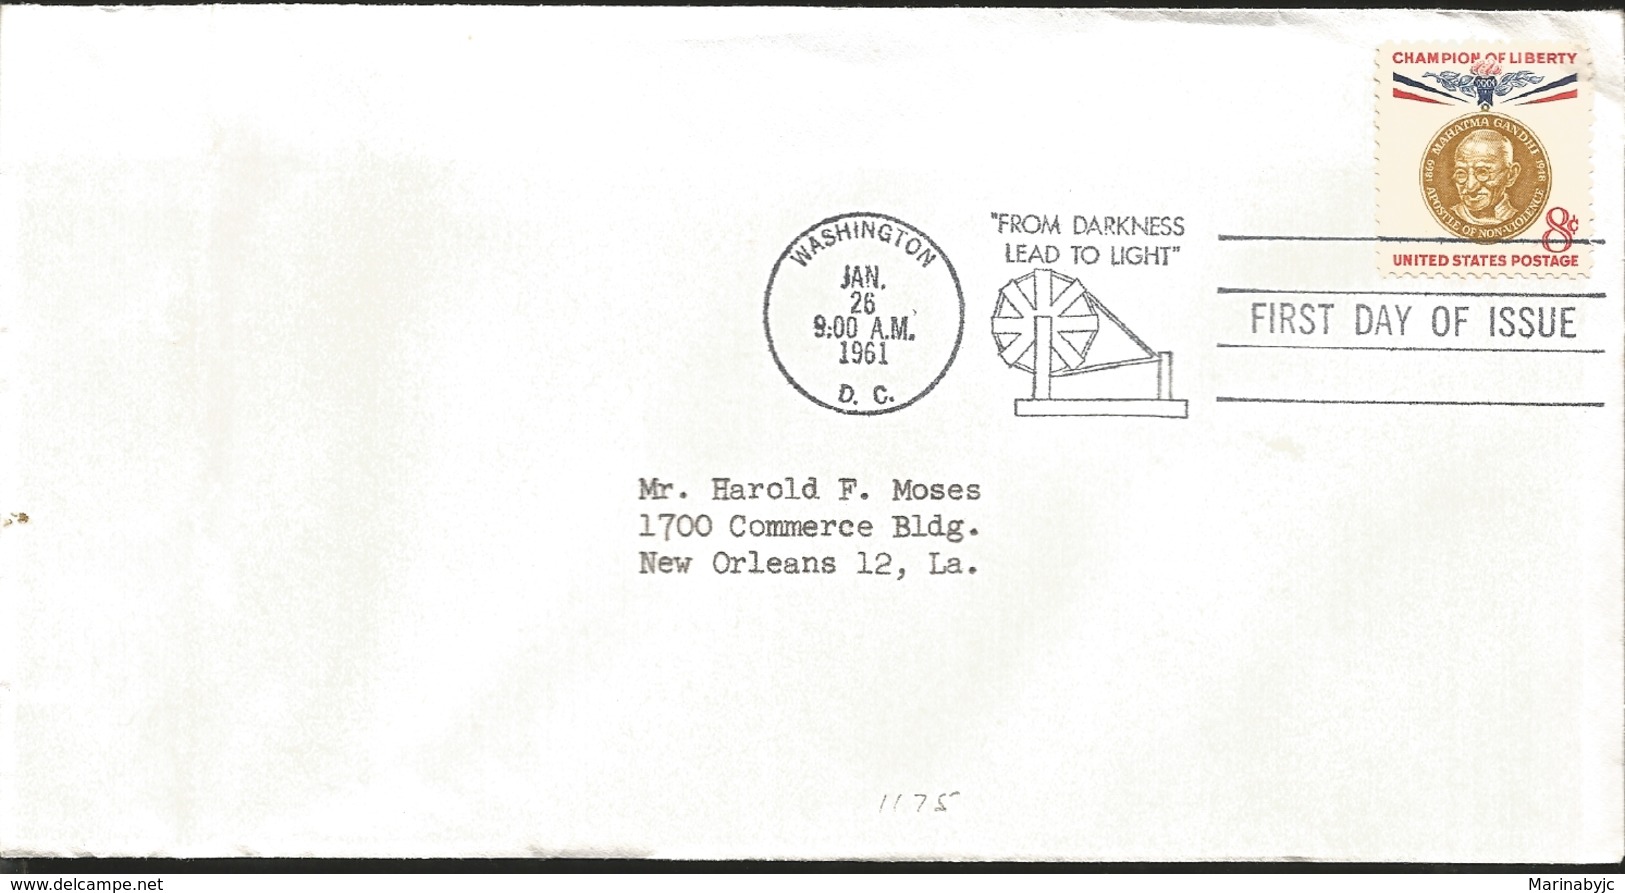 J) 1961 UNITED STATES, MASONIC GRAND LODGE, CHAMION OF LIBERTY, MAHATMA GANDHI, FROM DARKNESS LEAD TO LIGHT, FDC - Covers & Documents